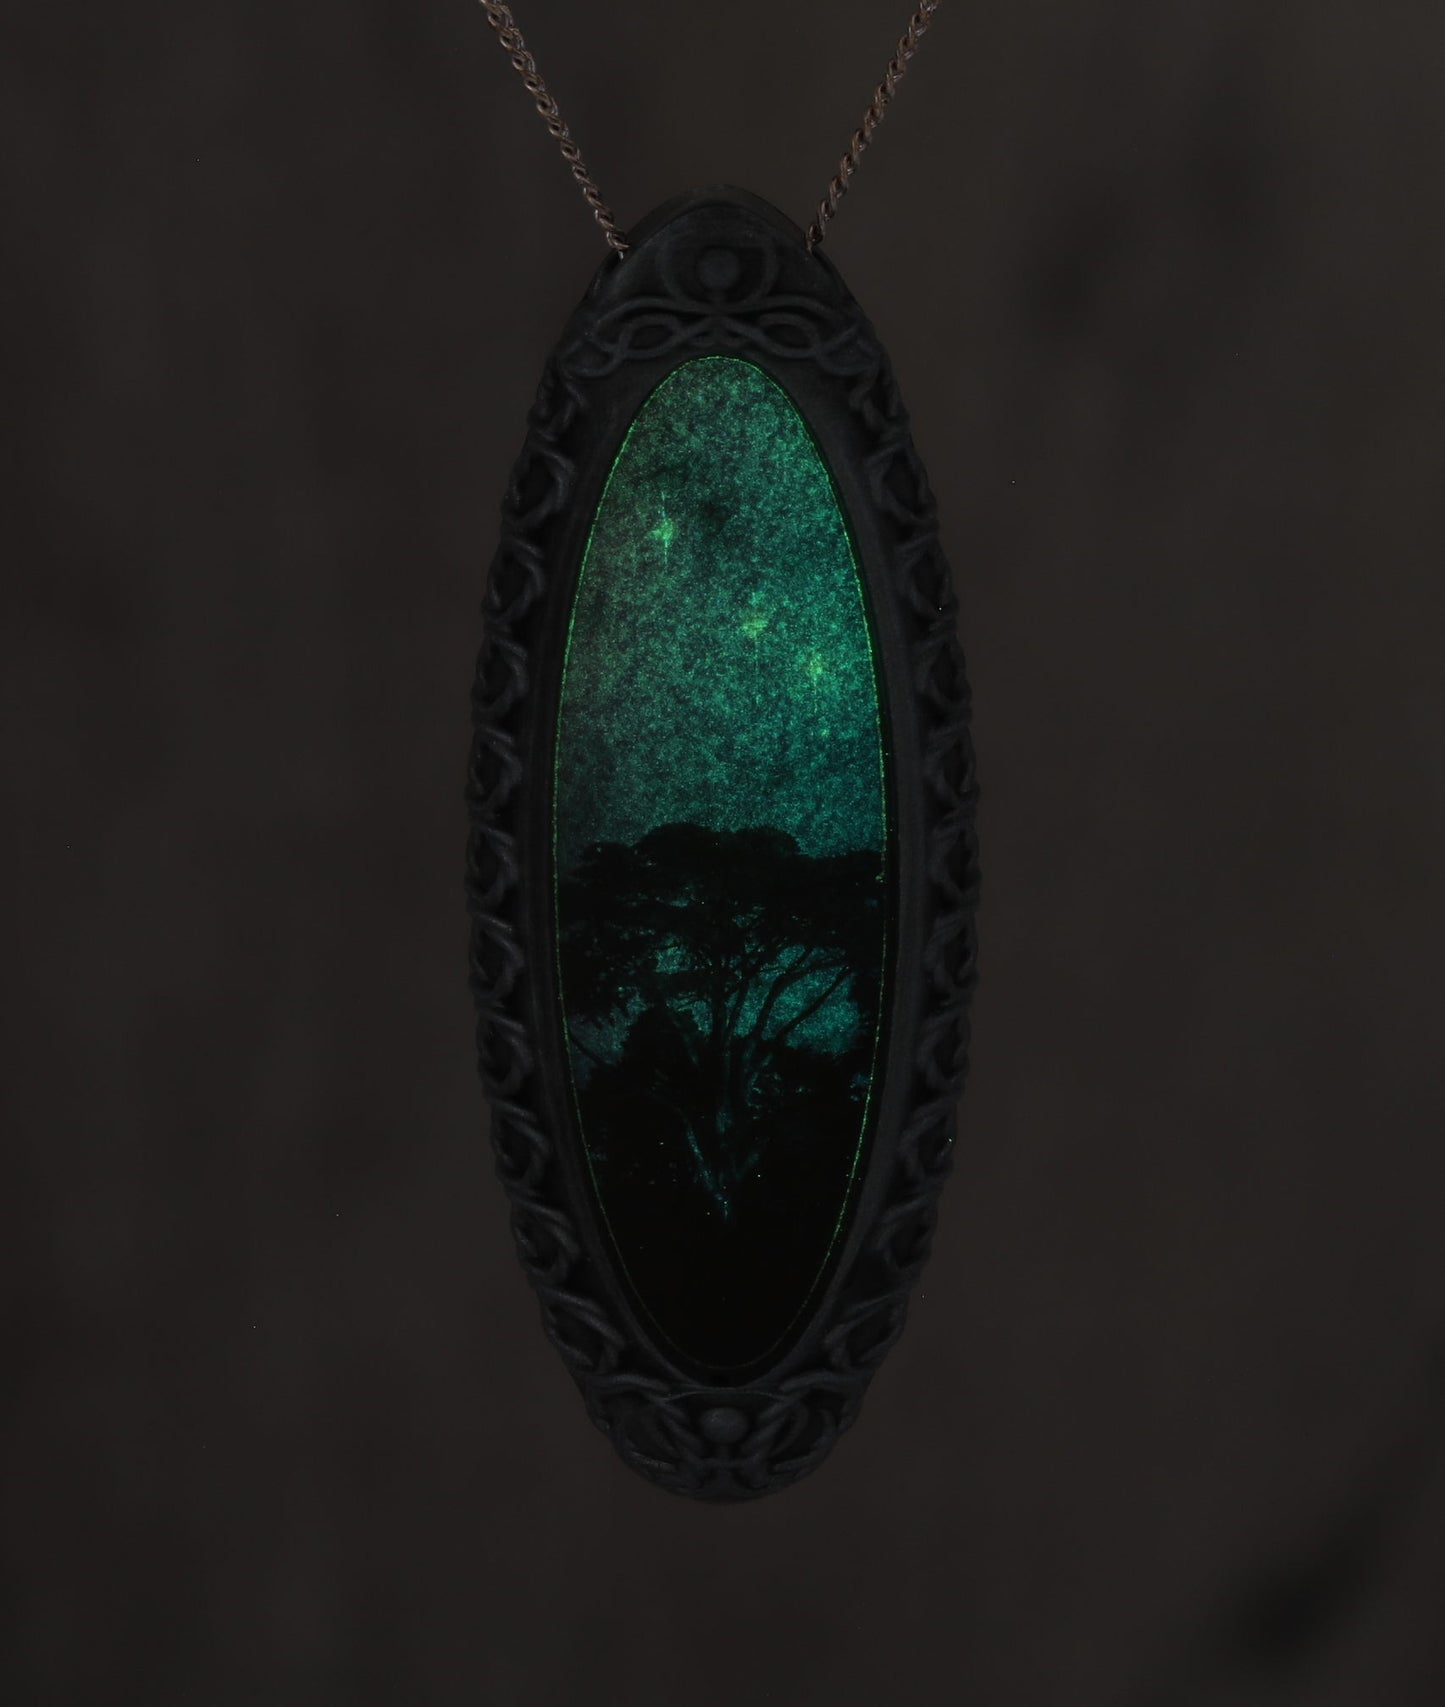 Trees Dreaming - Galaxy Pendant with Celtic Knotwork  and made with a photo of a tree and the Carina Nebula!